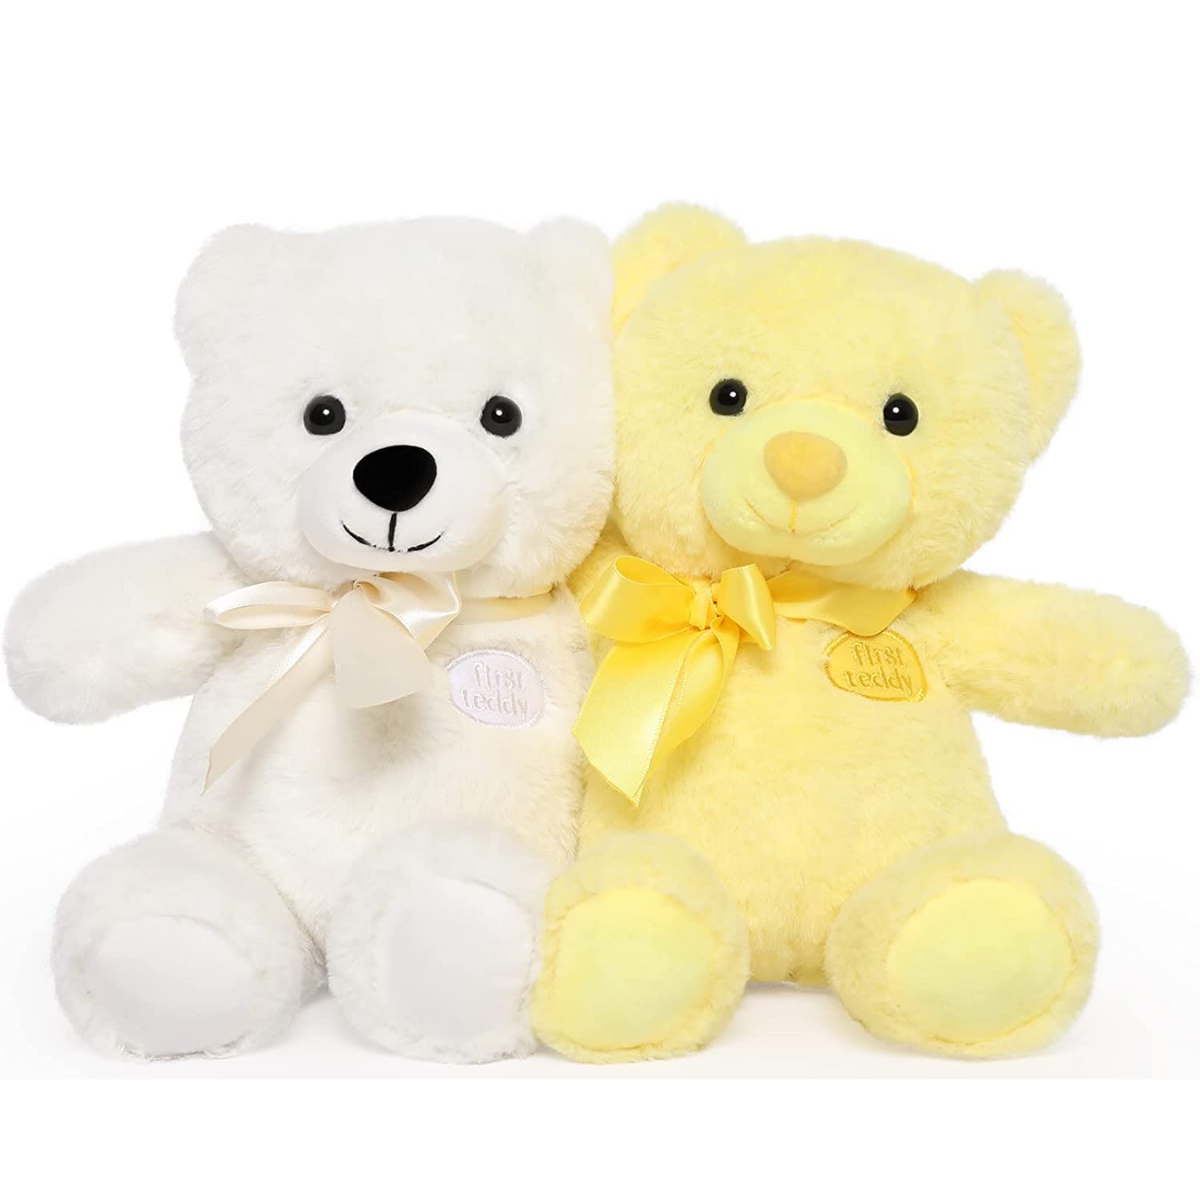 2-Pack Teddy Bear Plush Toy Set, 11.8 Inches